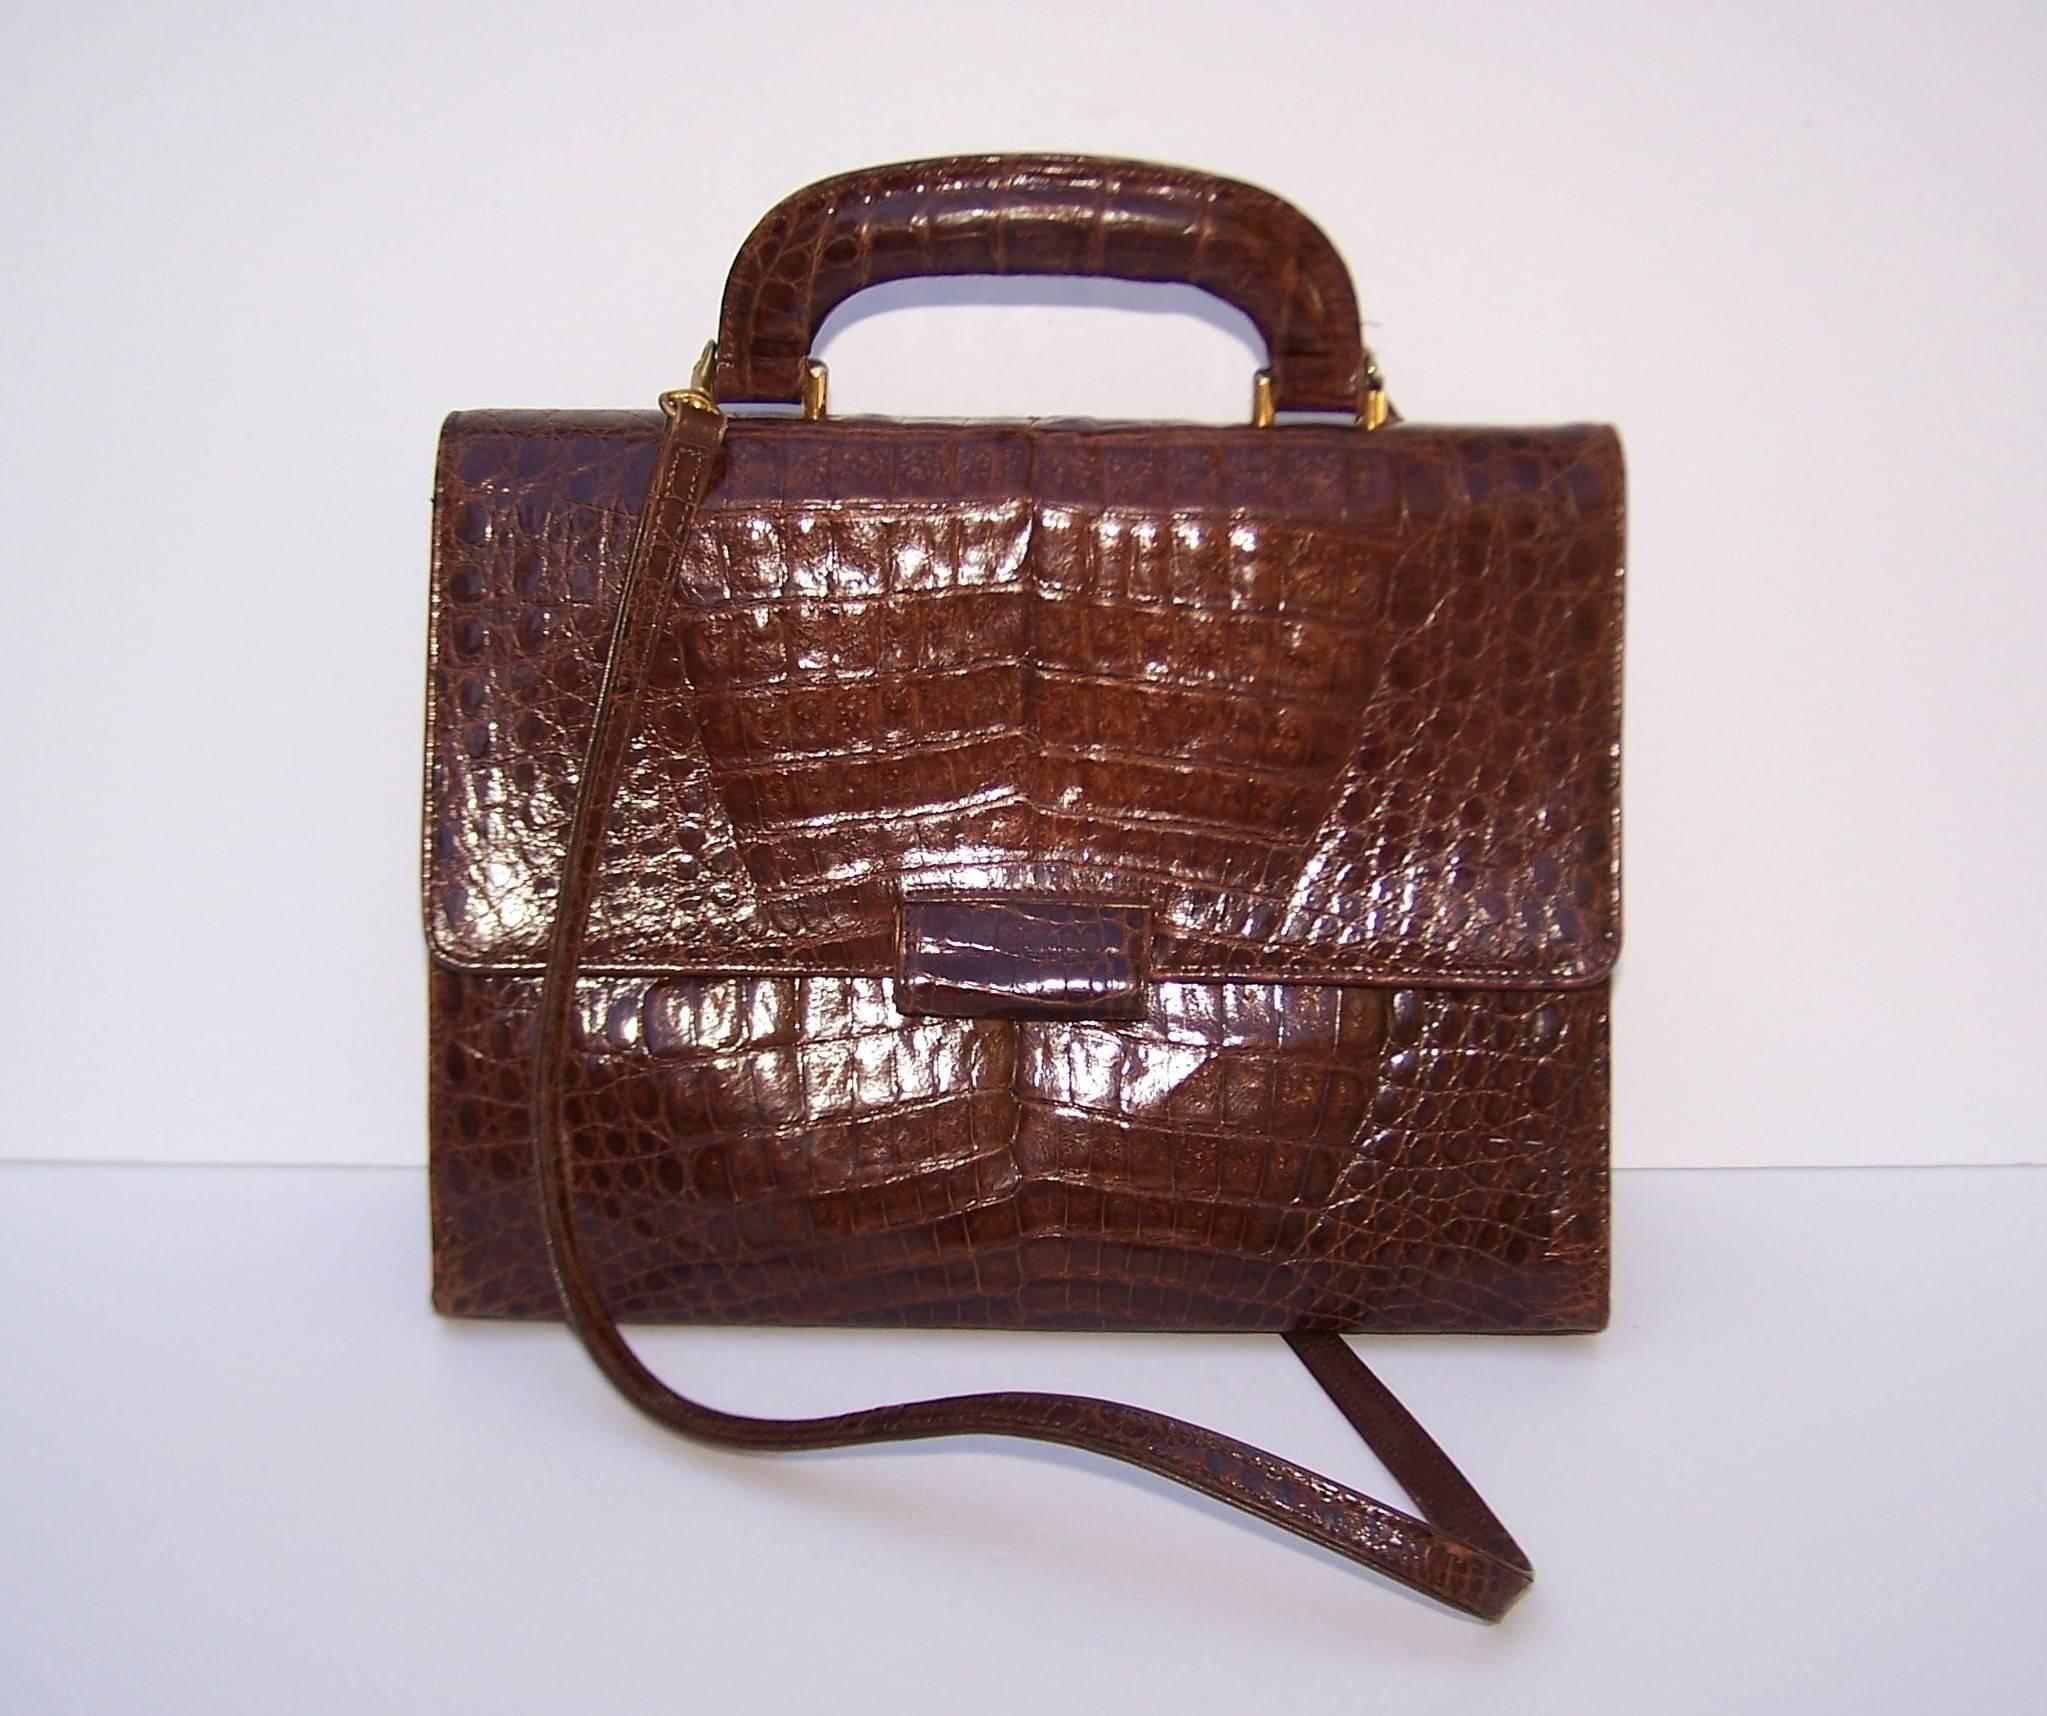 This classic crocodile handbag is brought to you from the talented hands of former fashion editor, Frances Patiky Stein.  Ms. Stein has worked for everyone from Vogue to Glamour.  She also served as artistic director for Chanel accessories in the